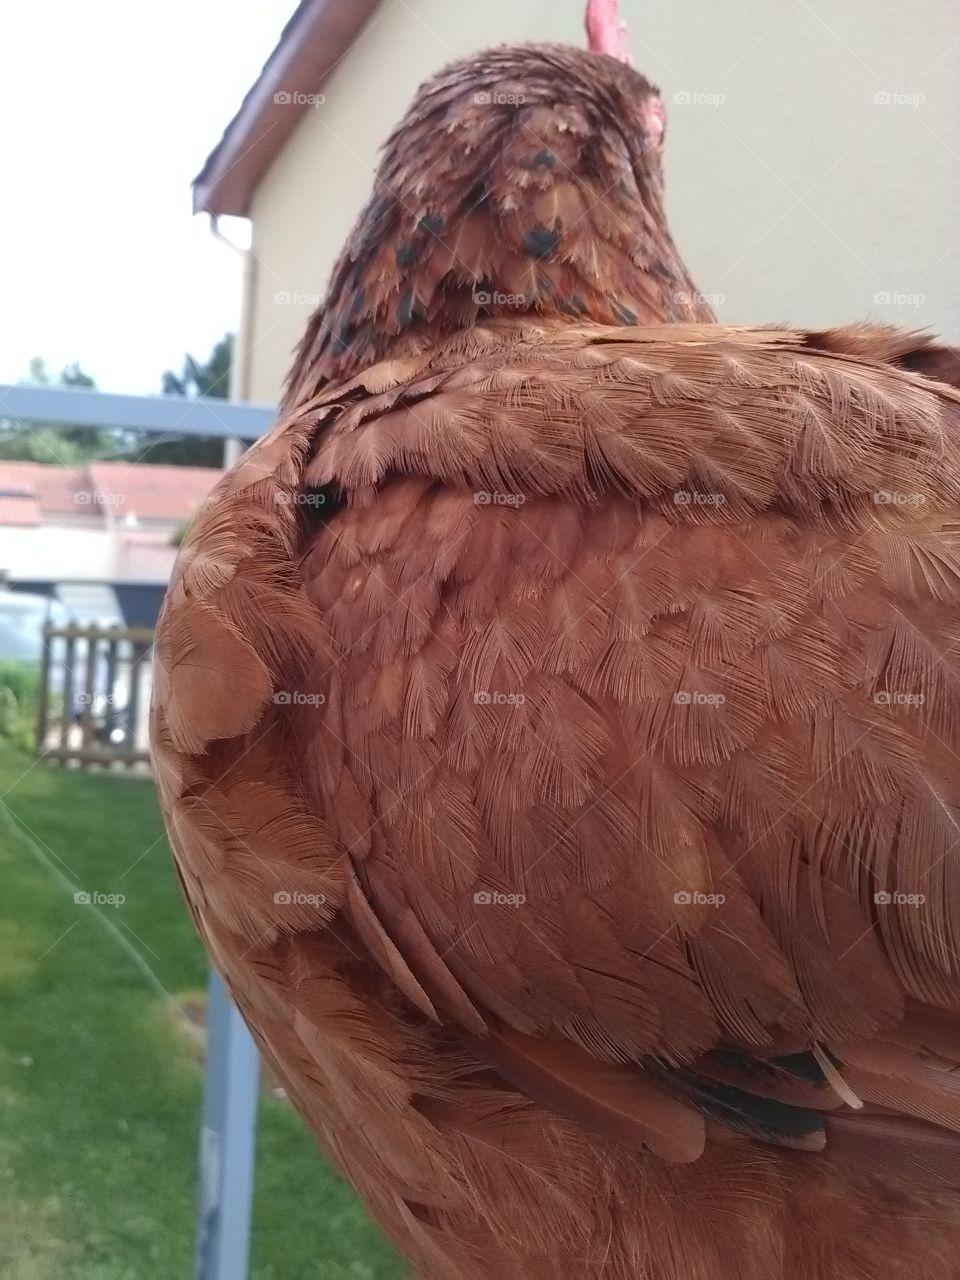 A hen perched on an arm with its head hidden